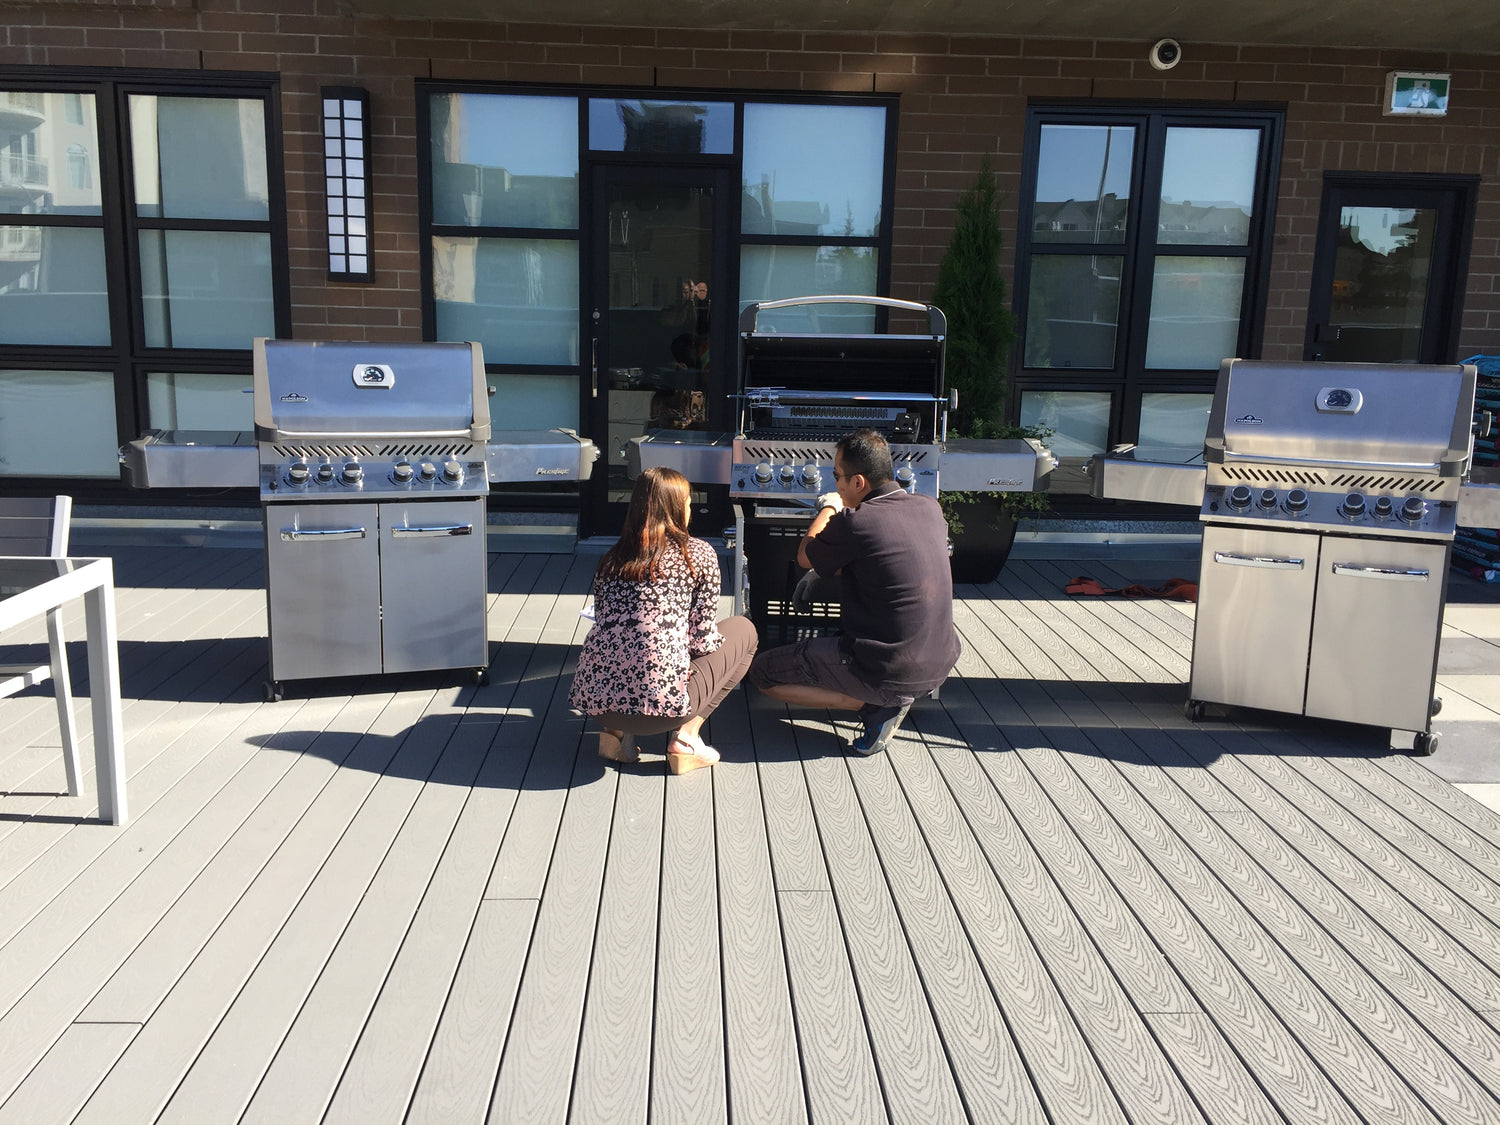 Napoleon Prestige P500RSIB - Natural Gas | A best seller at Barbecues Galore, packed full of features at a great price for some summer fun | Barbecues Galore: Burlington, Oakville, Etobicoke & Calgary